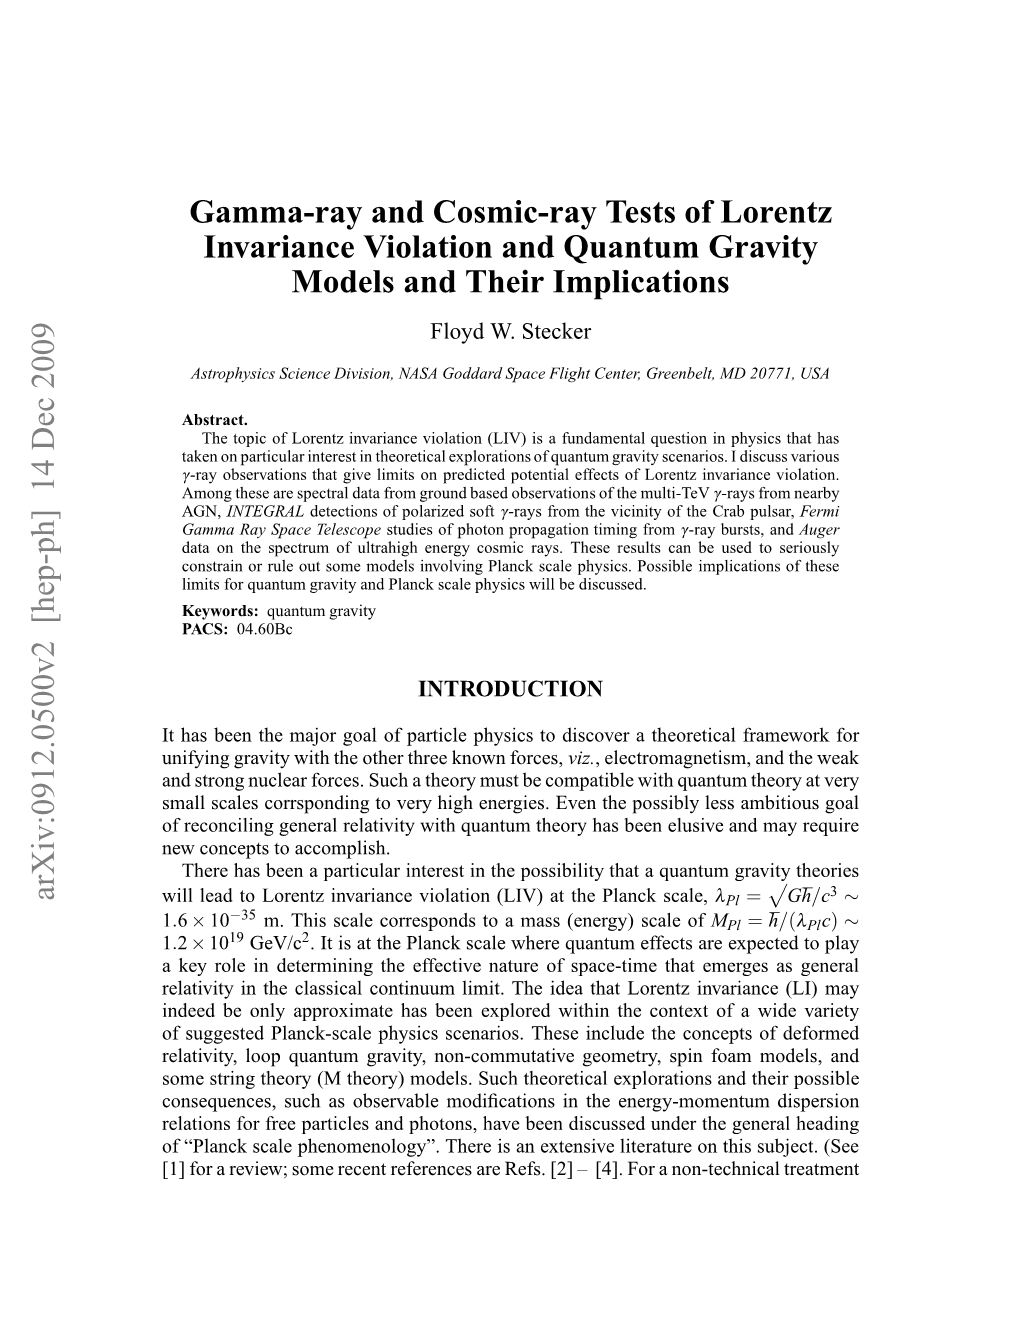 Gamma-Ray and Cosmic-Ray Tests of Lorentz Invariance Violation And